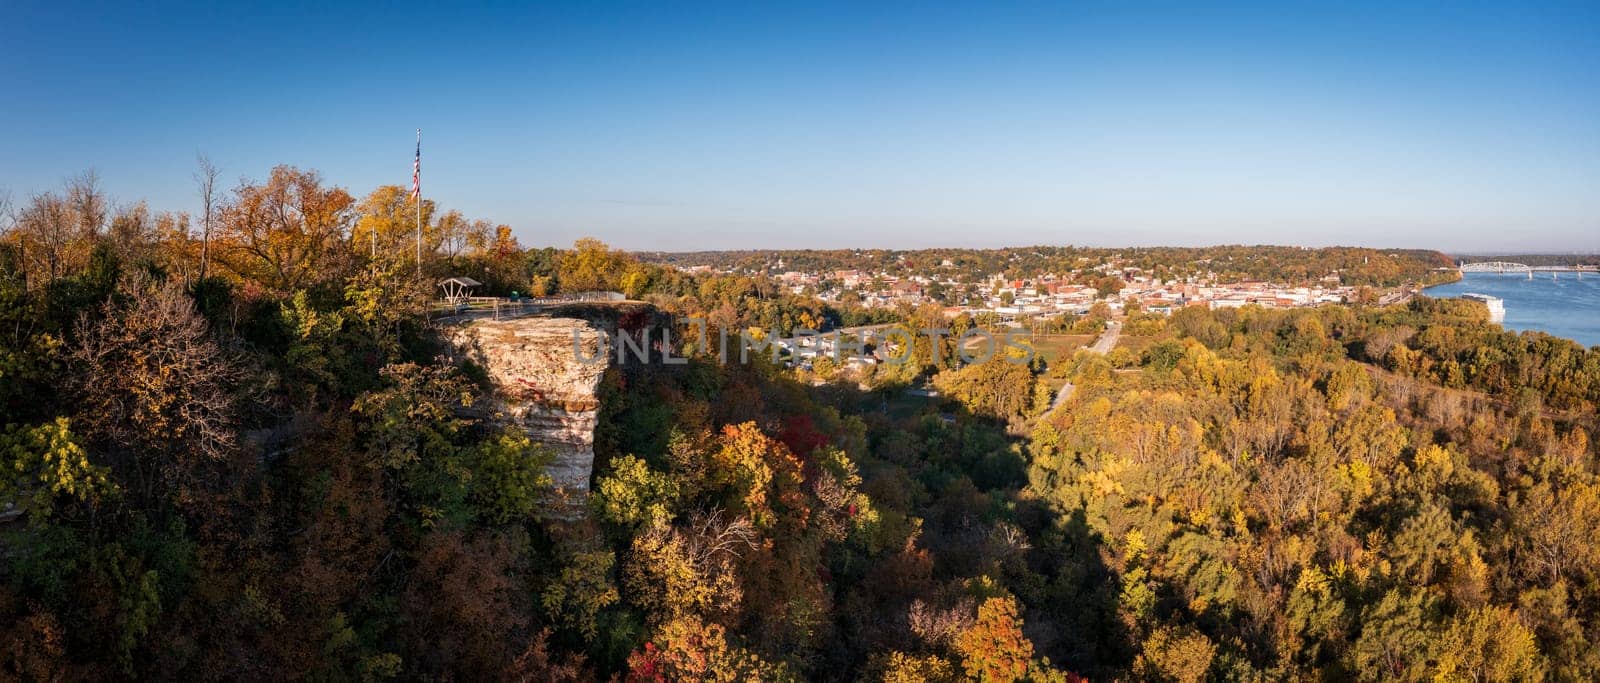 Aerial view of the city of Hannibal in Missouri from Lovers Leap overlook with Mississippi River in the distance